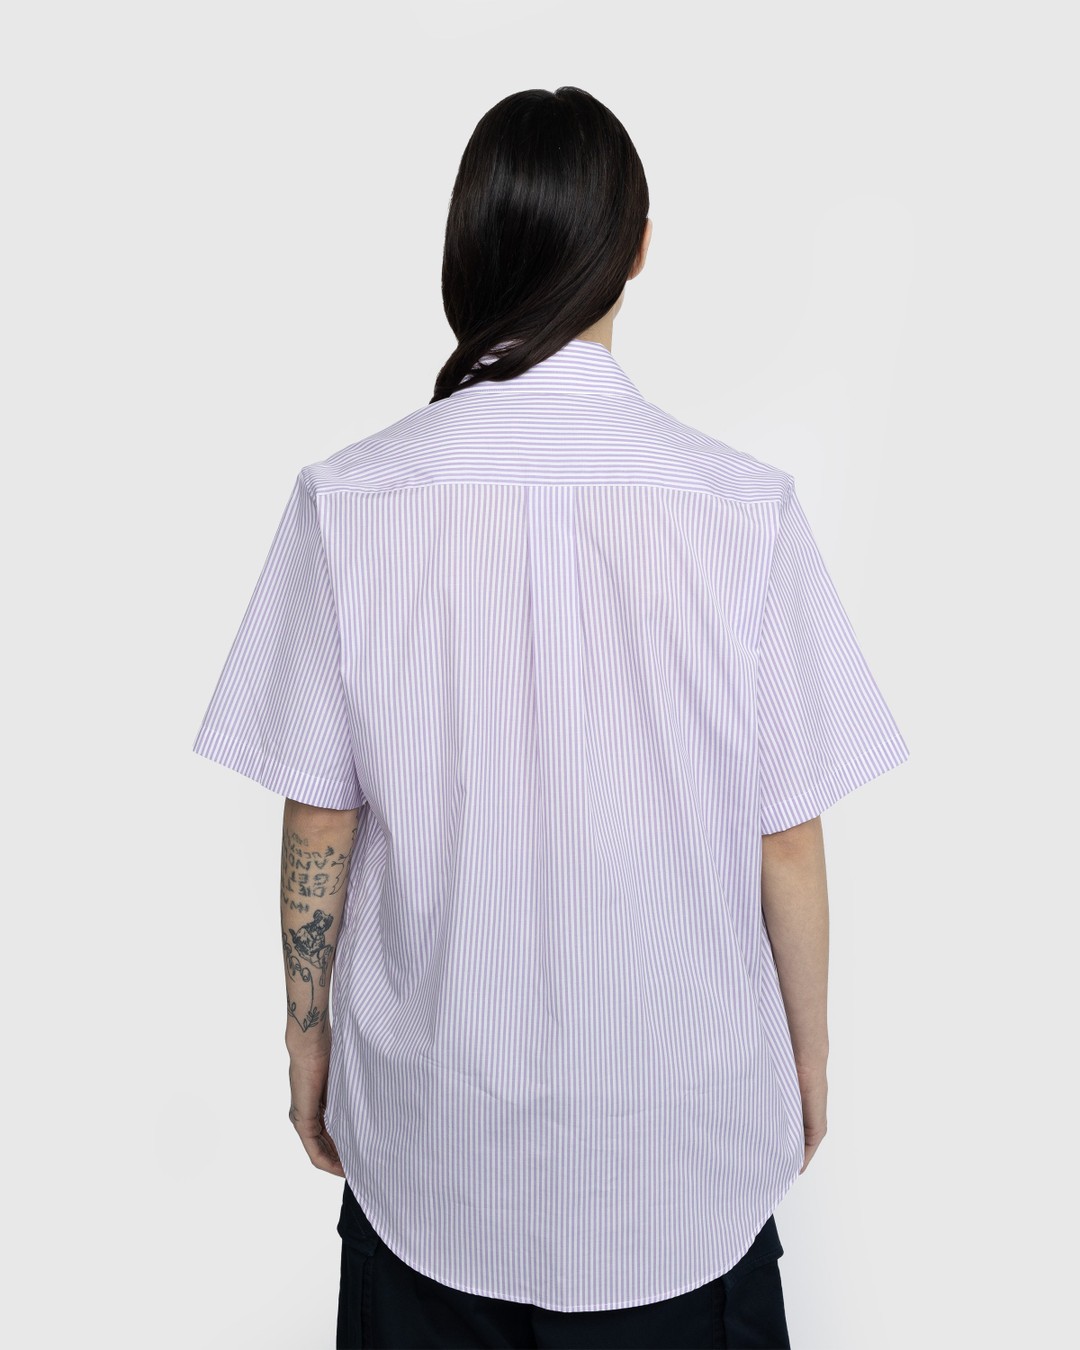 Martine Rose – Classic Short-Sleeve Button-Down Shirt Lilac and White Stripe - Shirts - Purple - Image 3